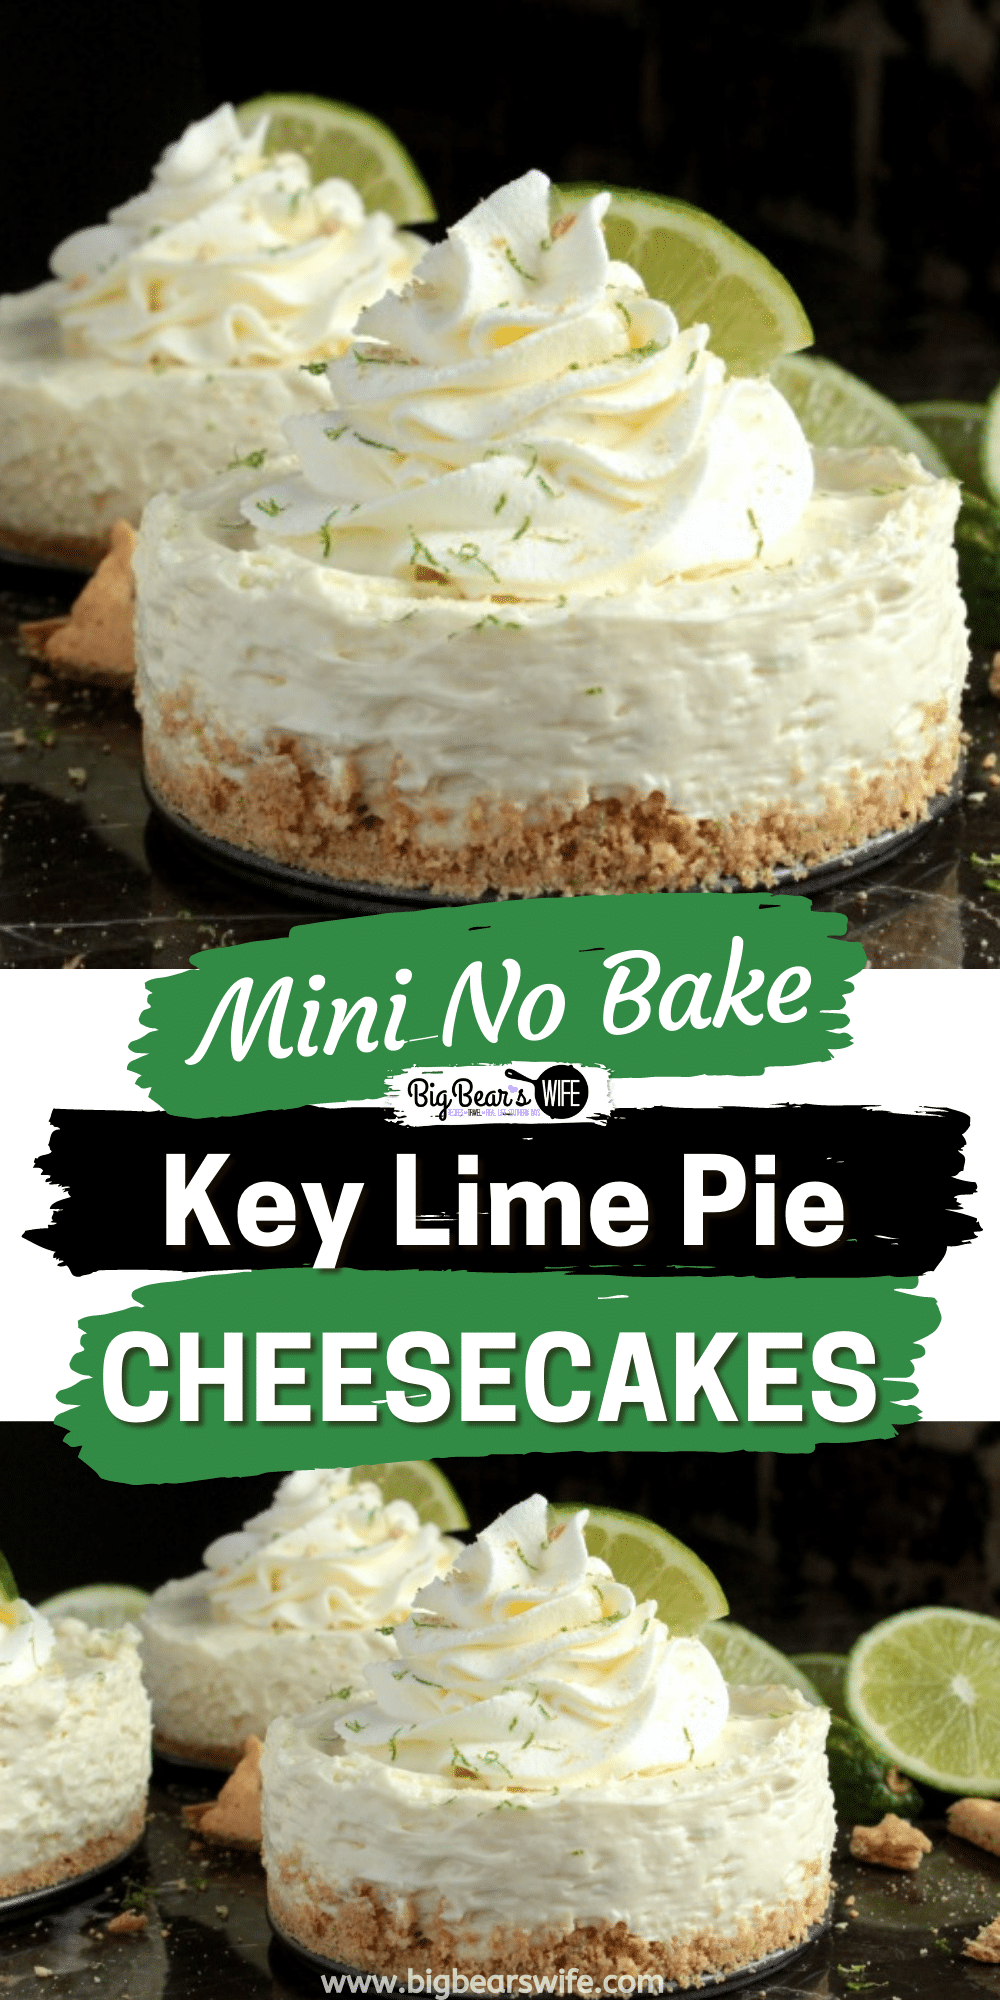 Mini No Bake Key Lime Pie Cheesecakes – easy little no bake cheesecakes with a graham cracker and lime zest crust that’s been filled with a tasty key lime cheesecake filling and topped with homemade whipped cream.

 via @bigbearswife